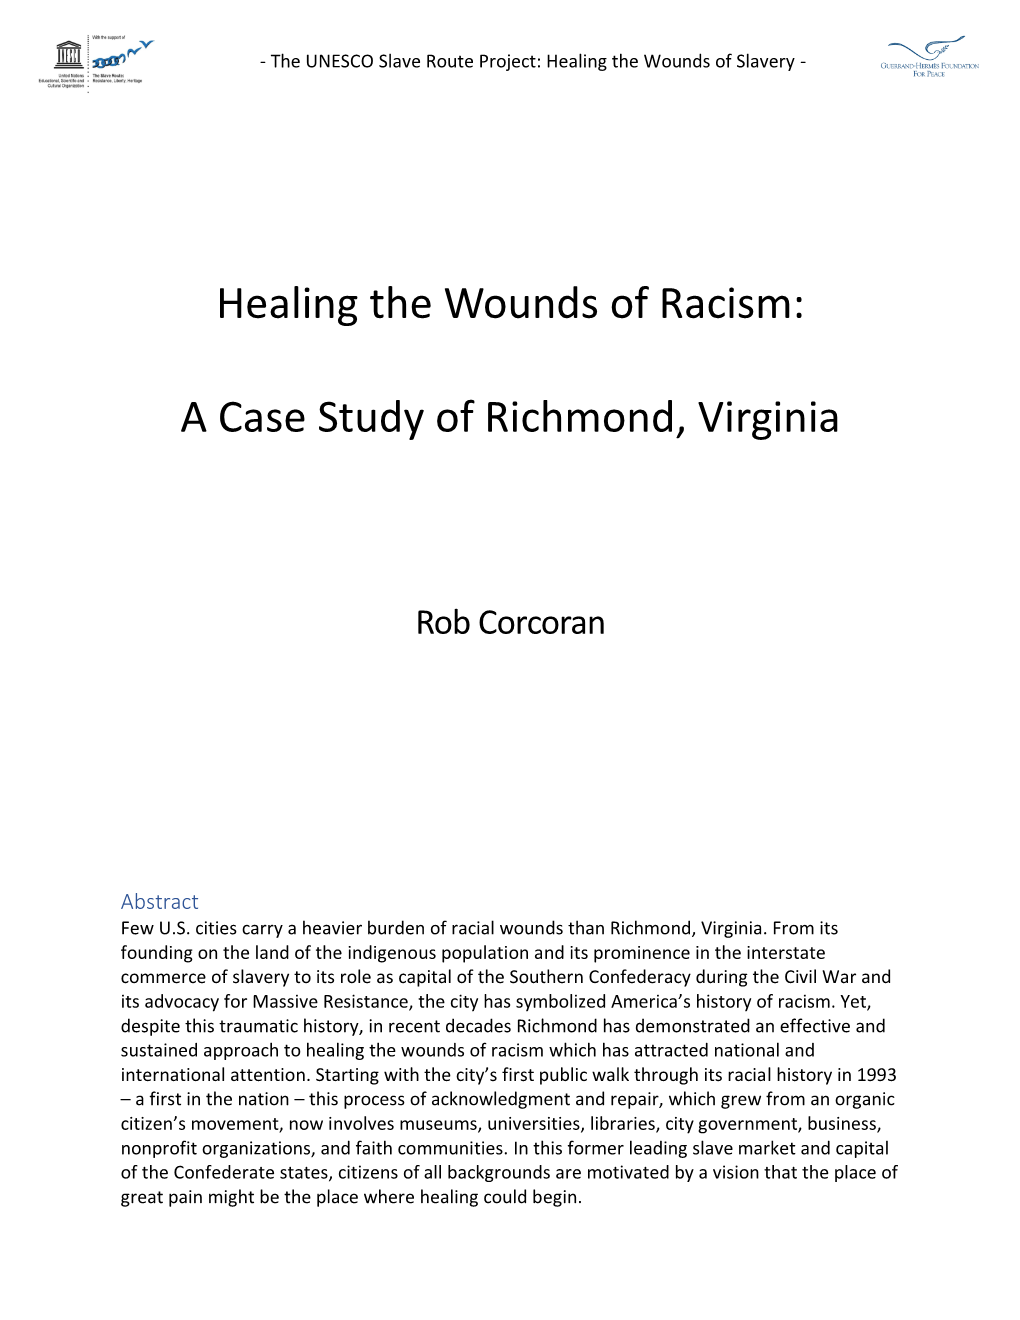 Healing the Wounds of Racism: a Case Study of Richmond, Virginia